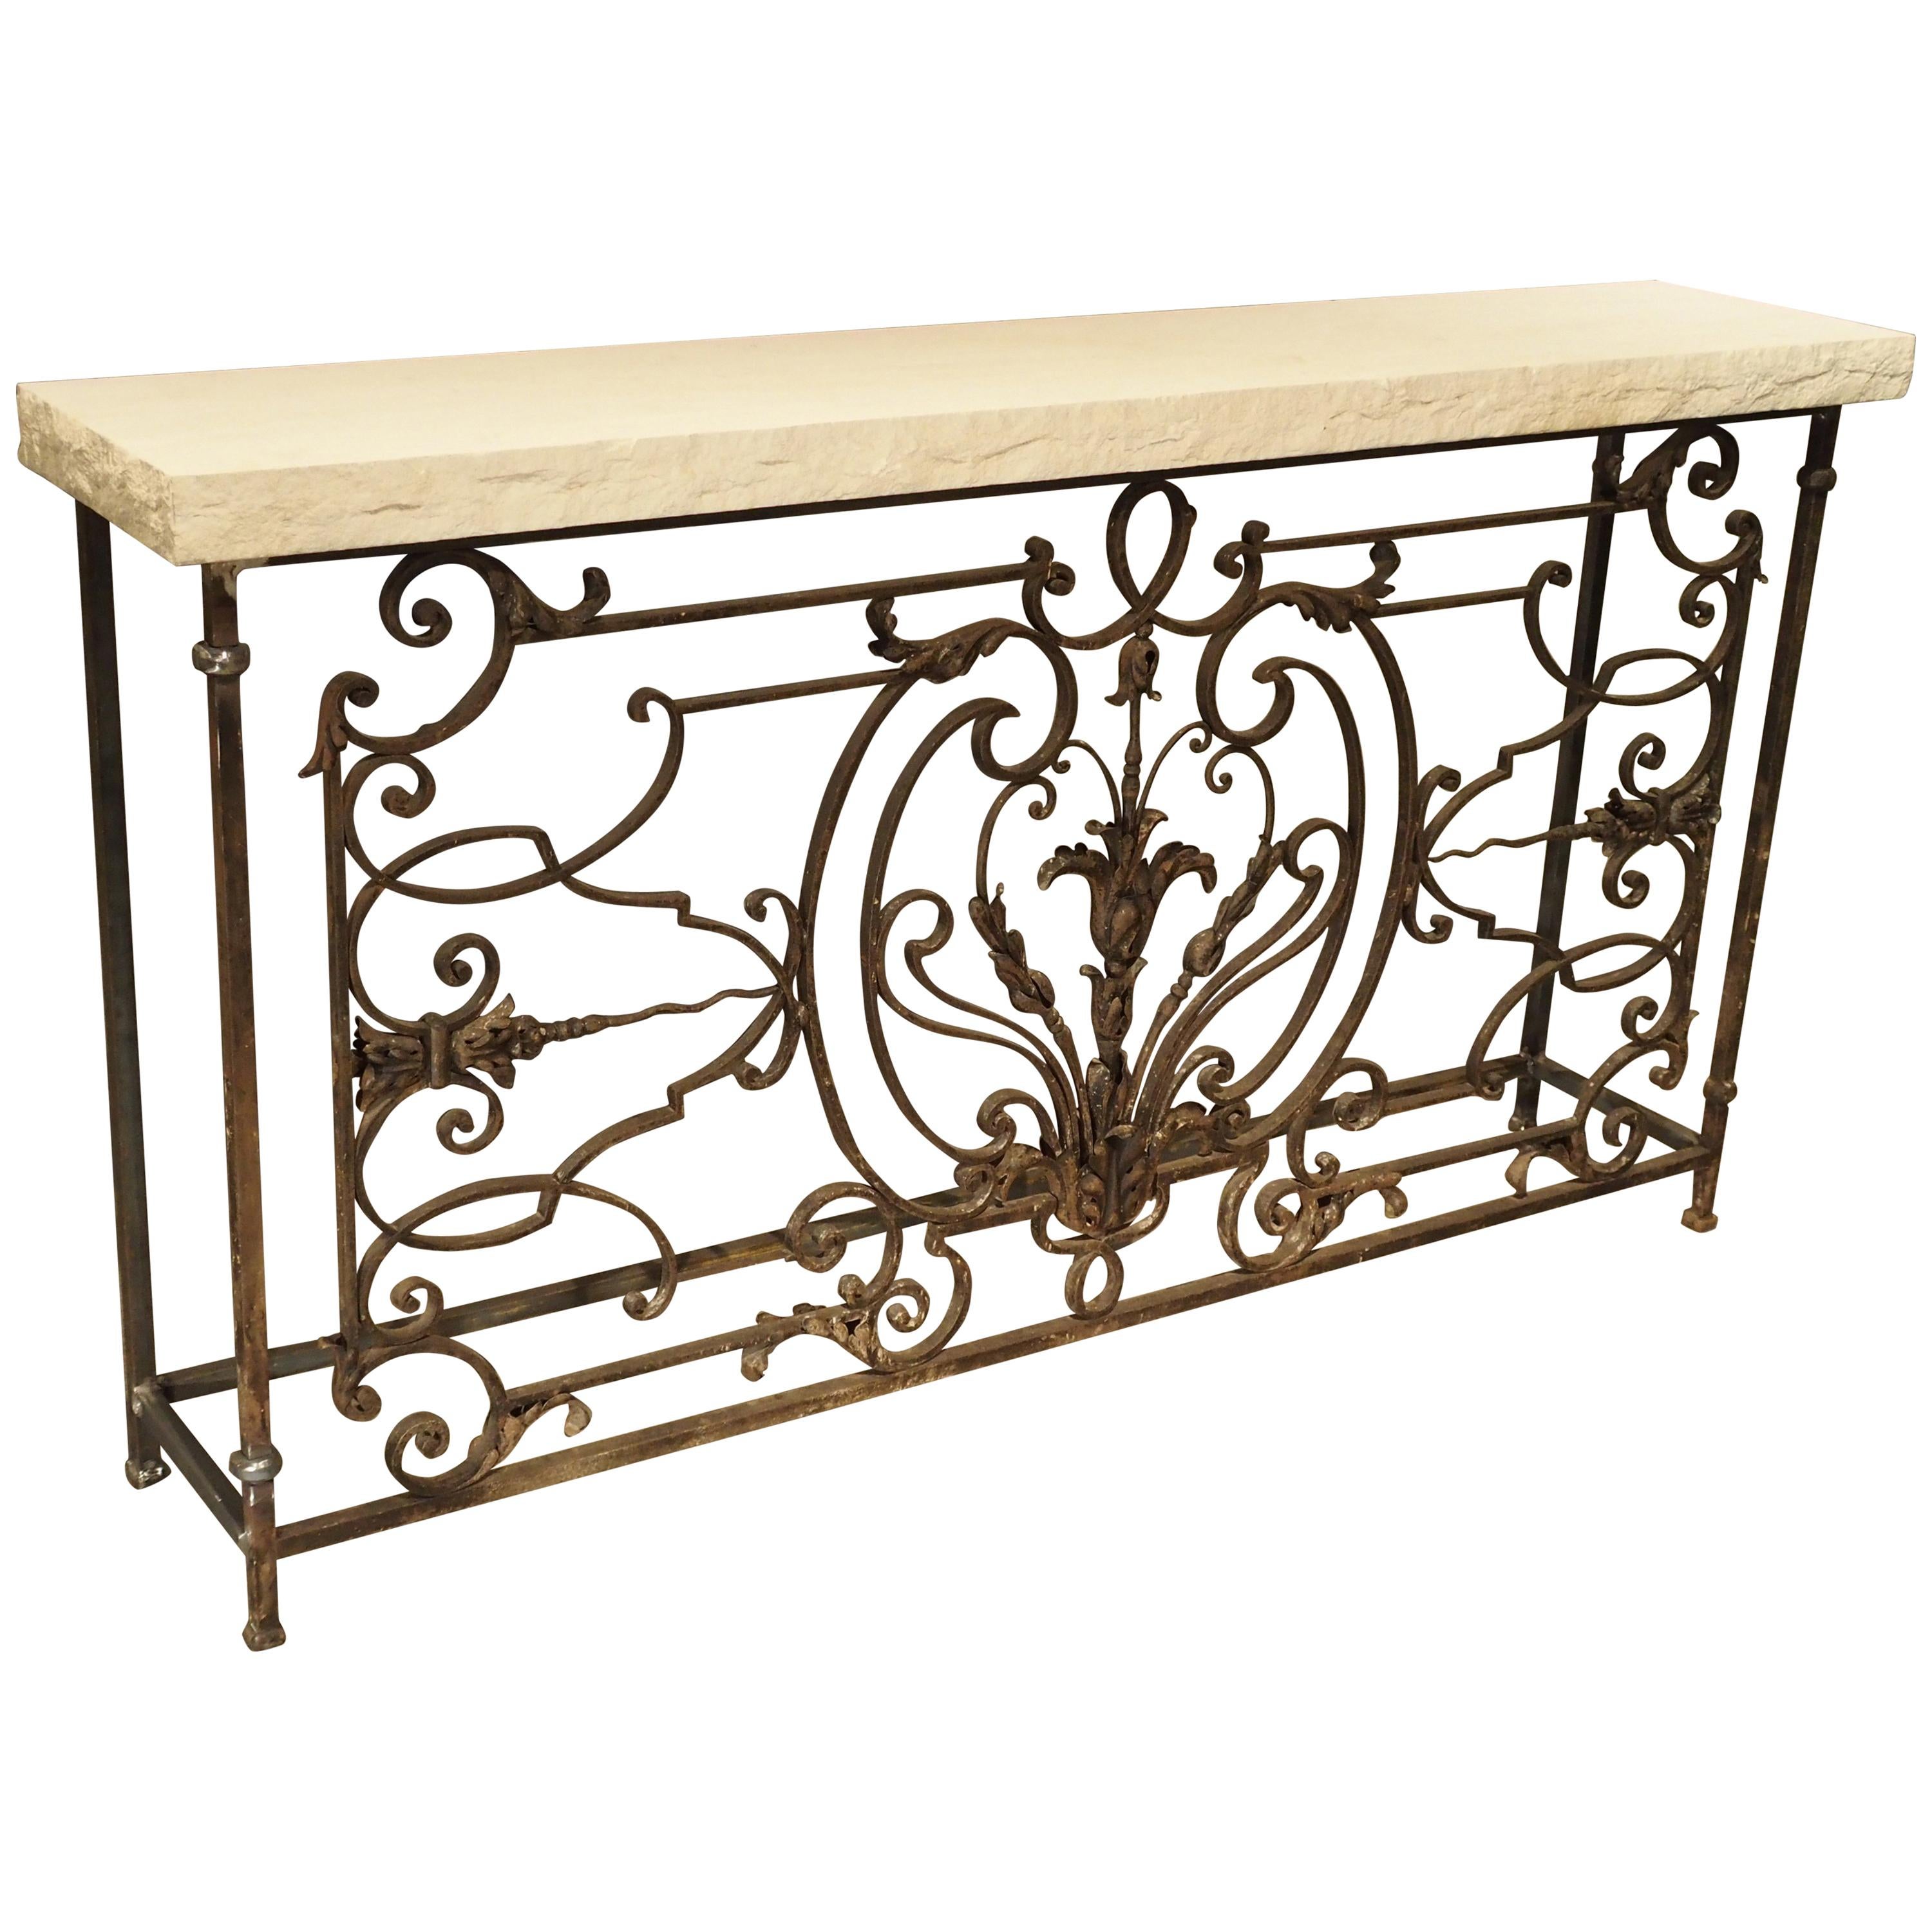 19th Century French Iron Balcony Console with Limestone Top